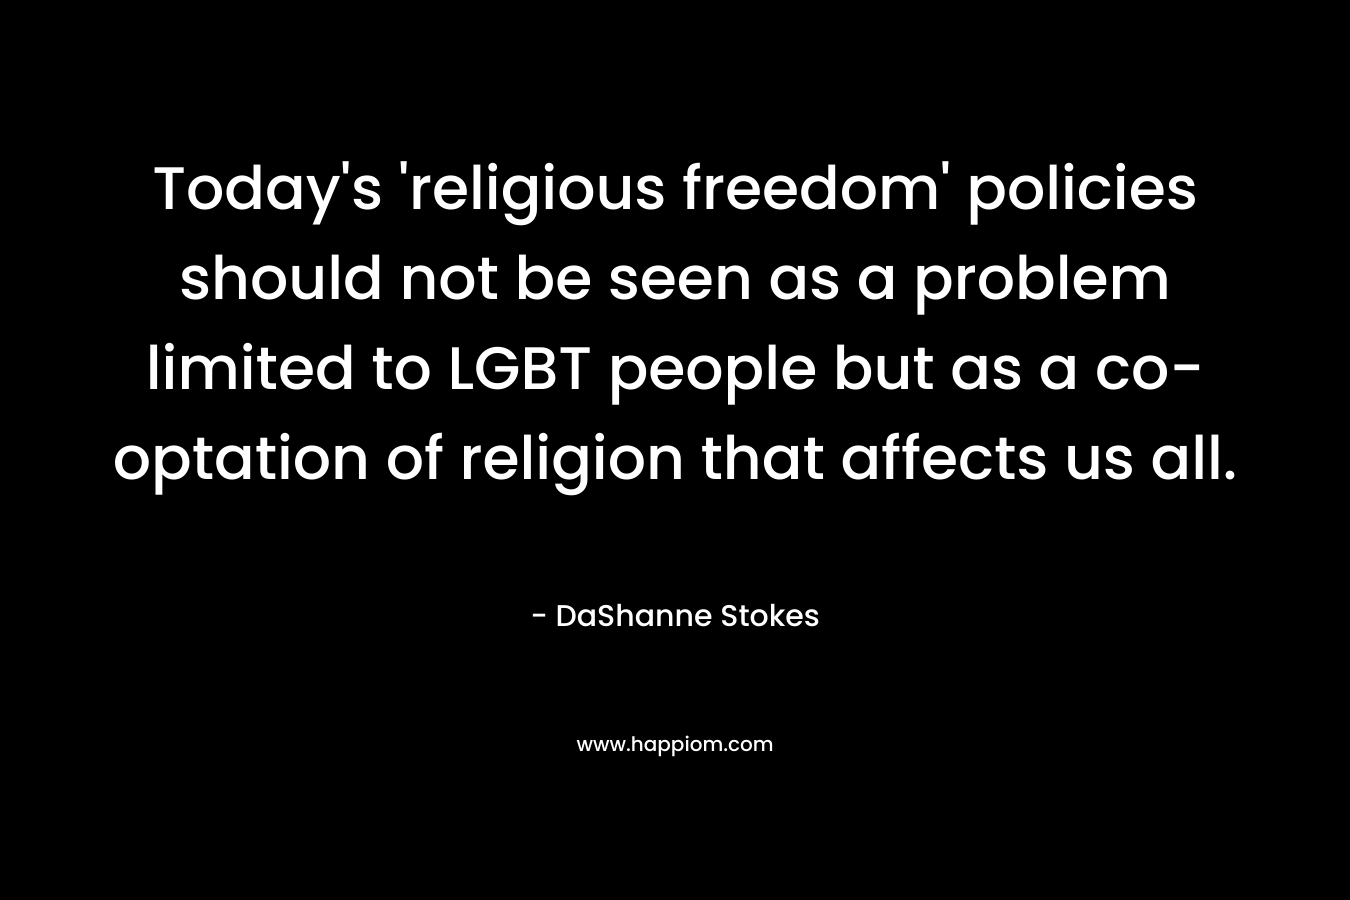 Today's 'religious freedom' policies should not be seen as a problem limited to LGBT people but as a co-optation of religion that affects us all.